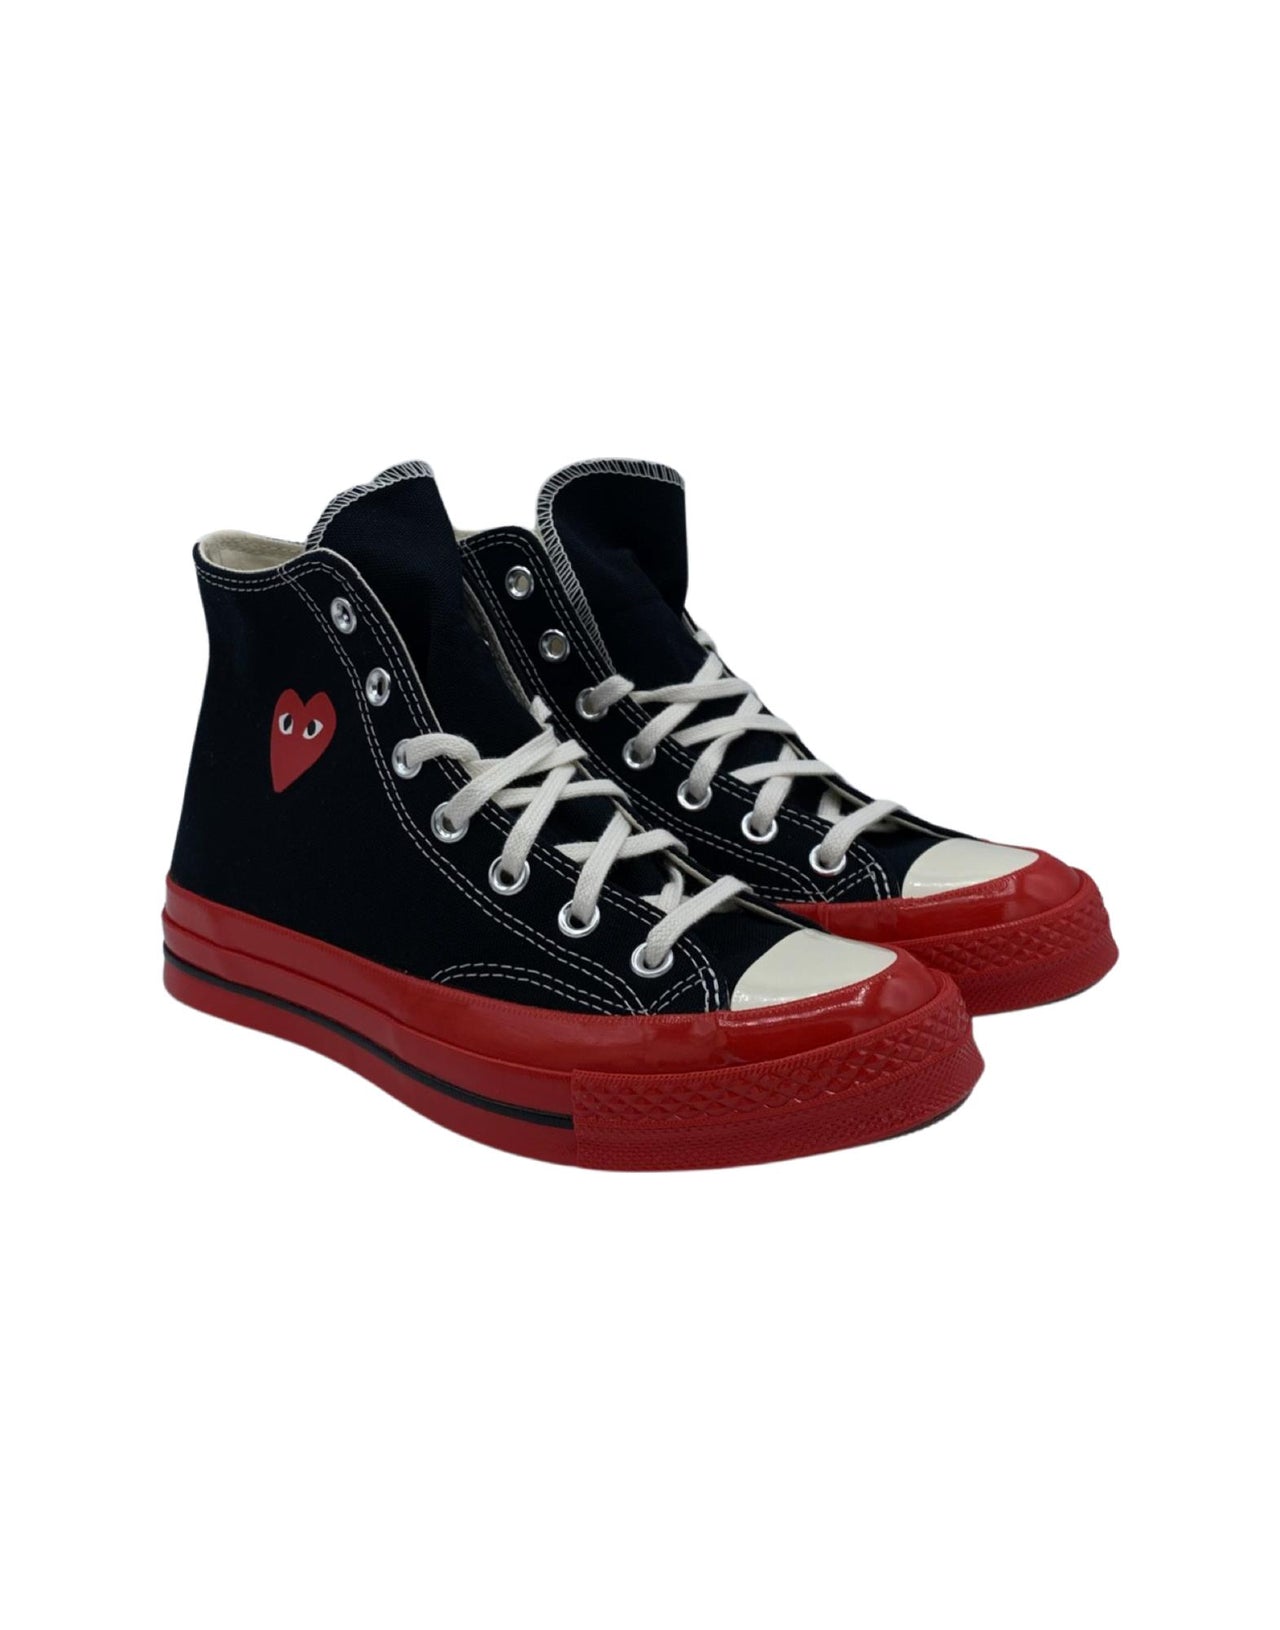 CDG Play Converse High Black Red Sole